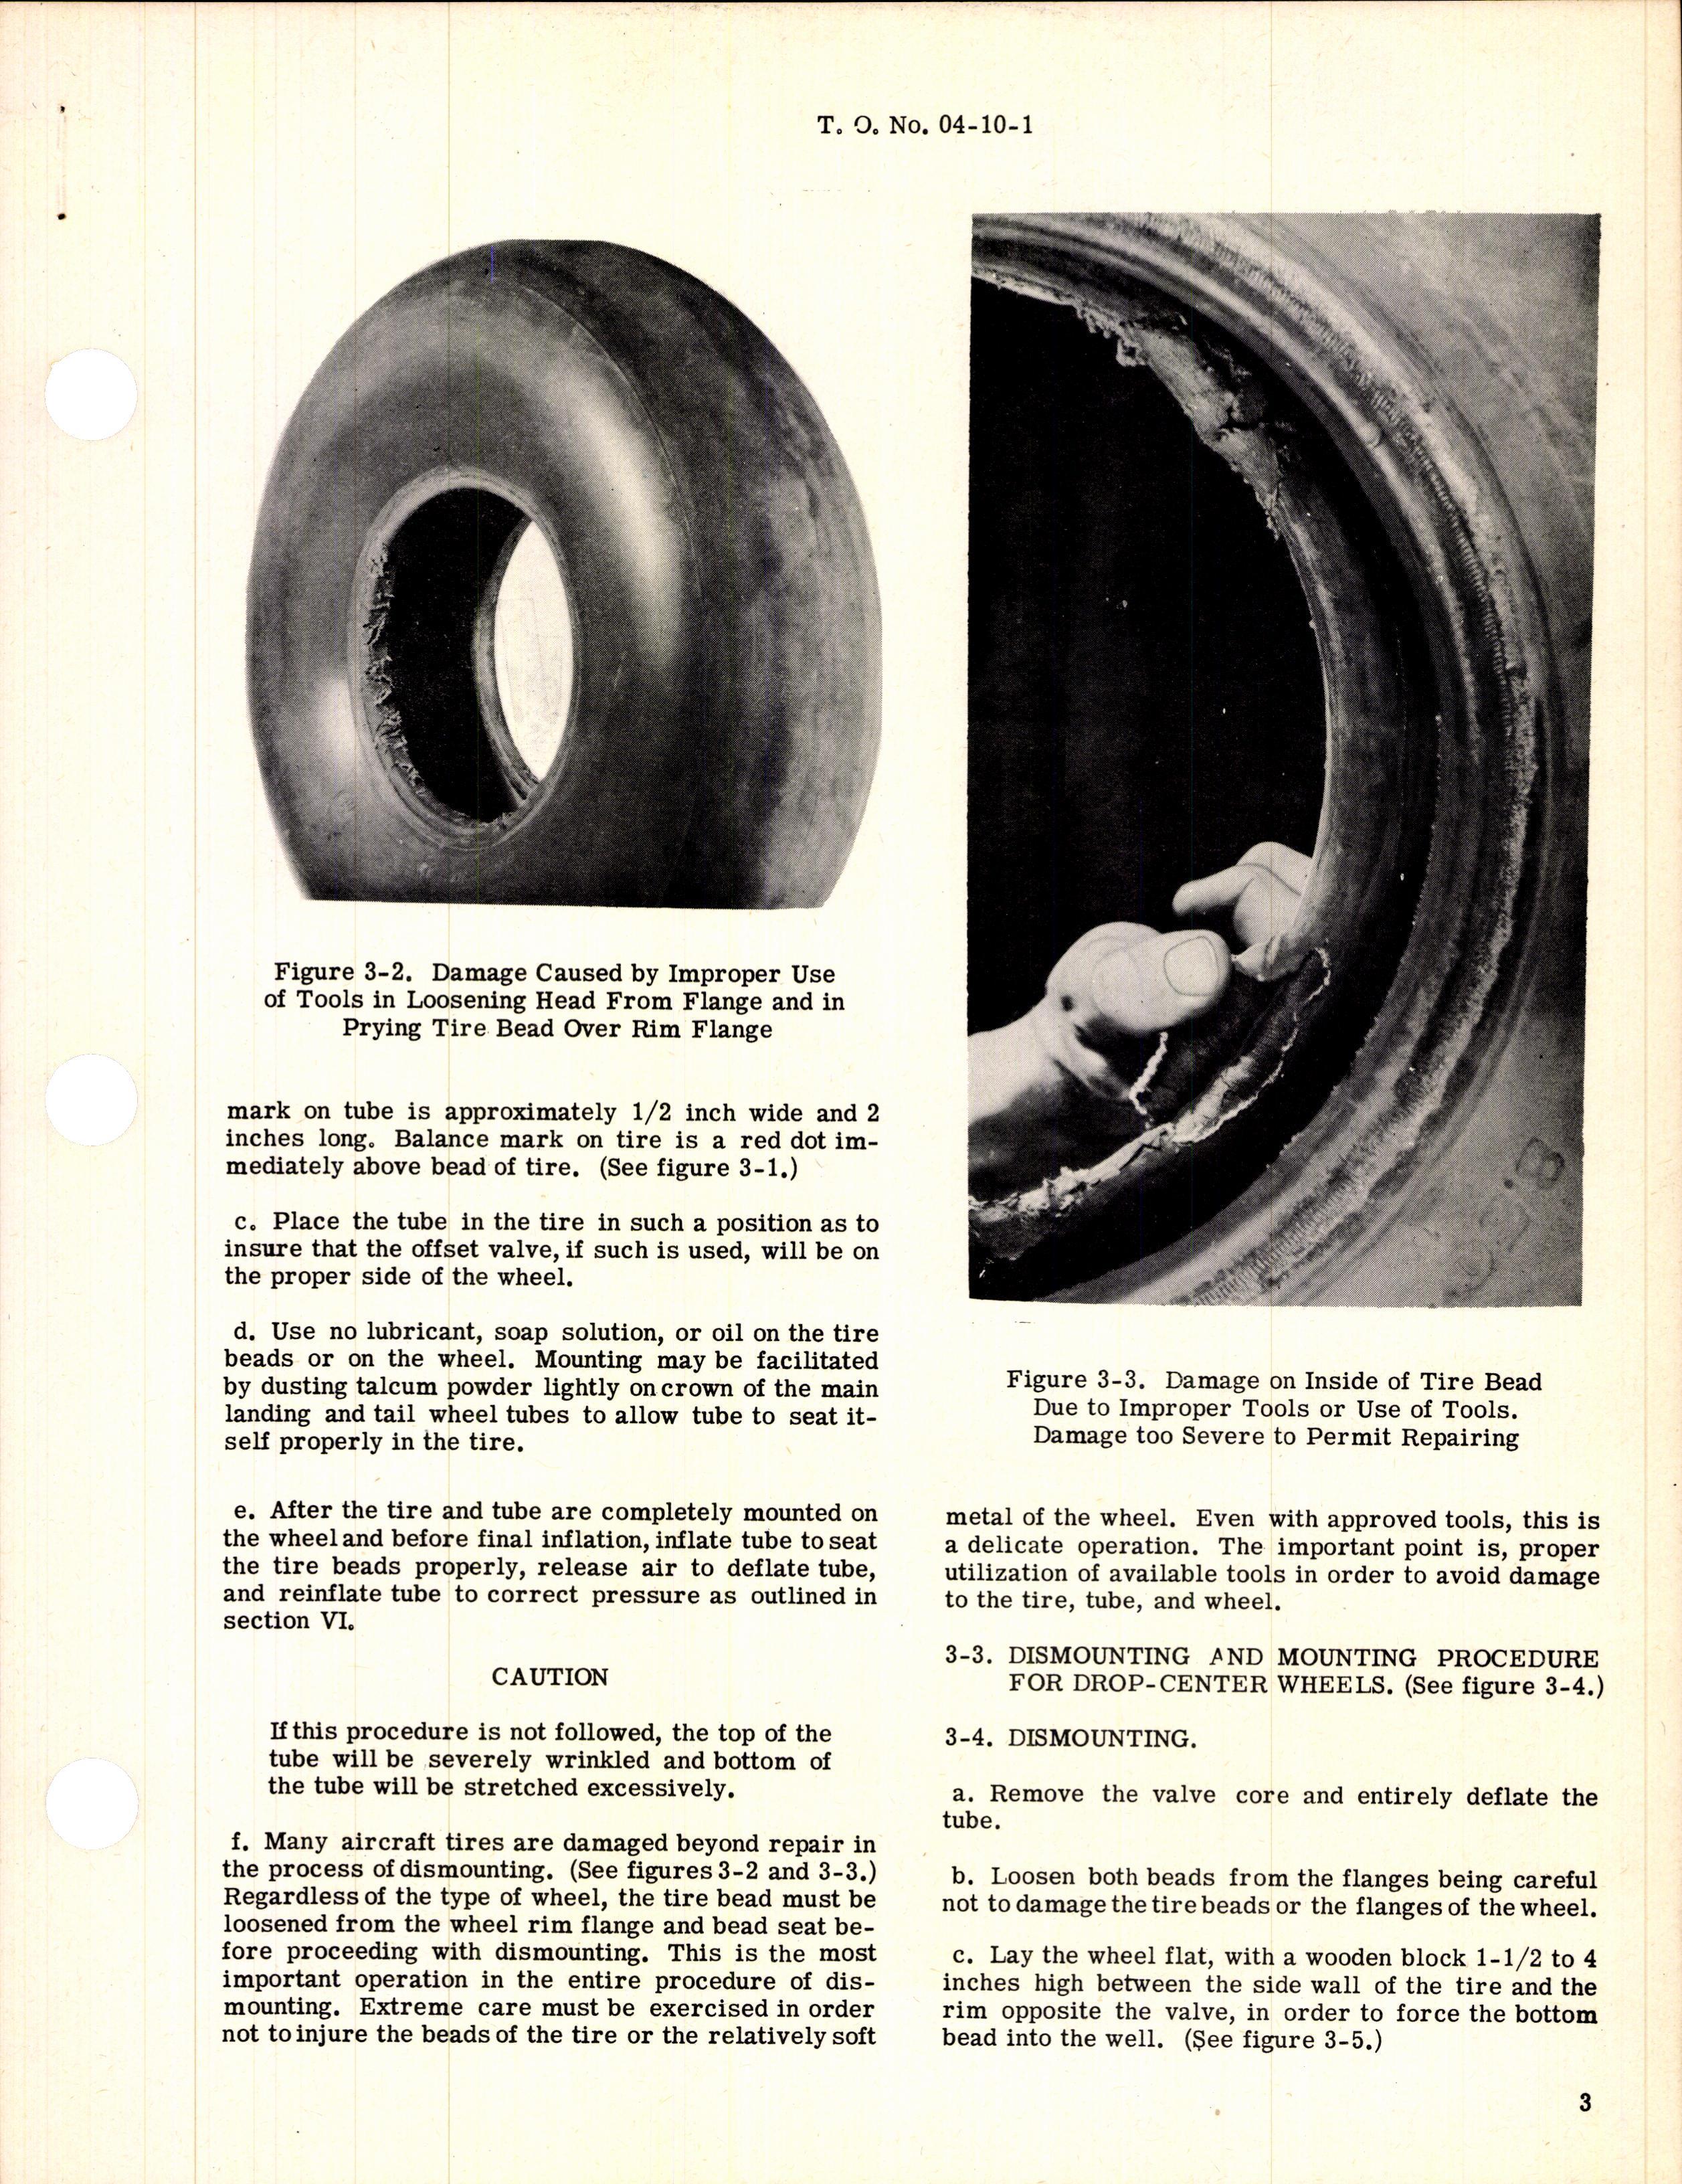 Sample page 5 from AirCorps Library document: Dismounting, Mounting, and Inflation of Aircraft Tires and Tubes